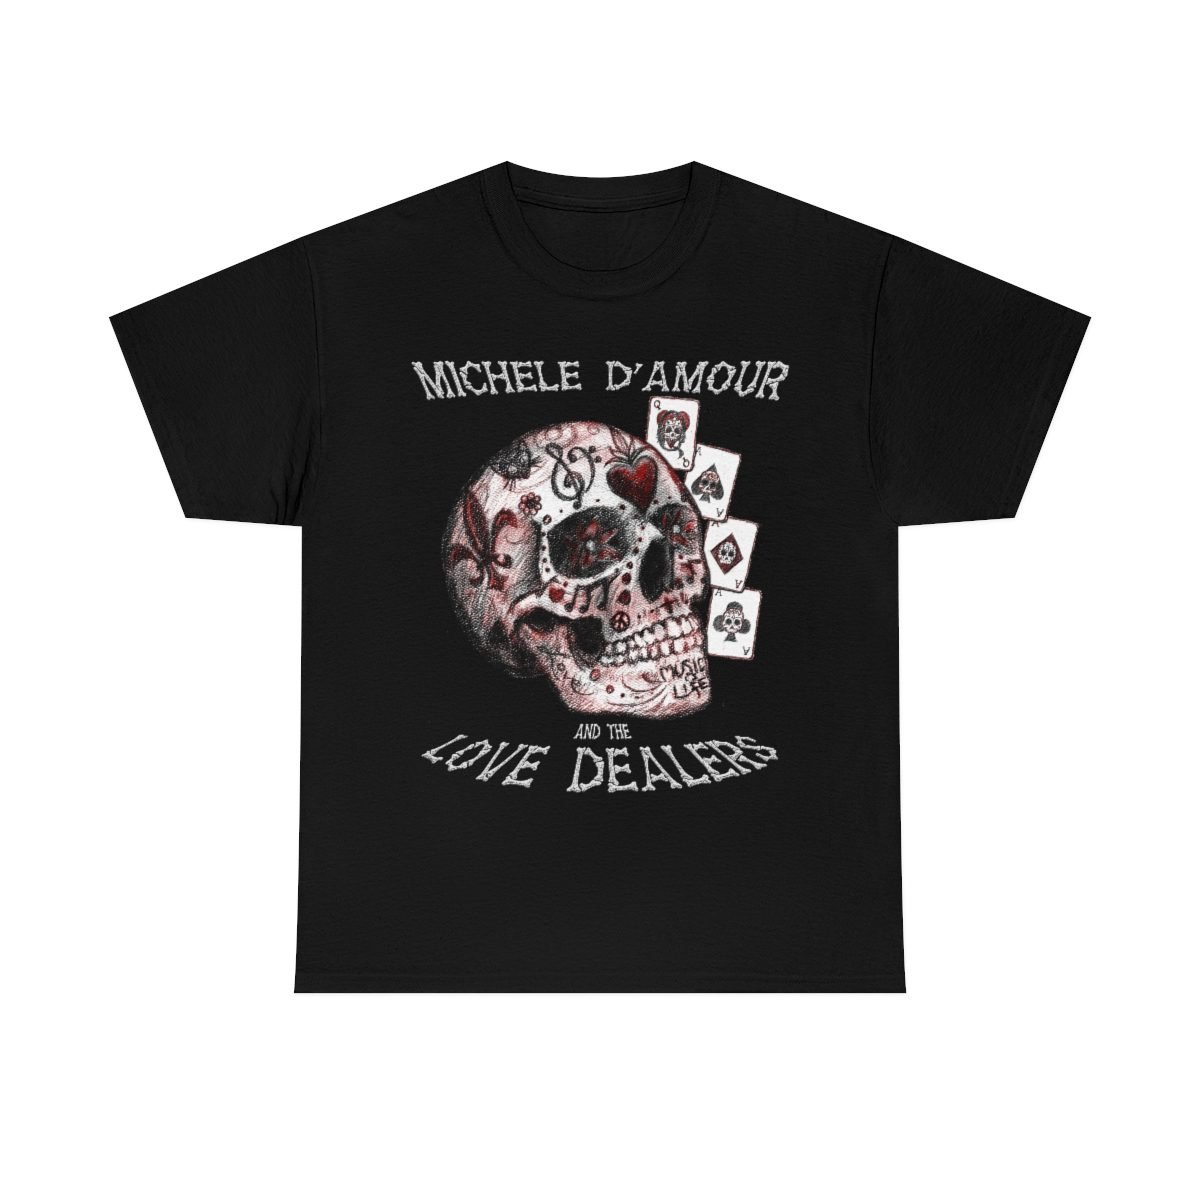 TSSutherland – Michelle D’Amour and The Love Dealers Short Sleeve Tshirt (5000)